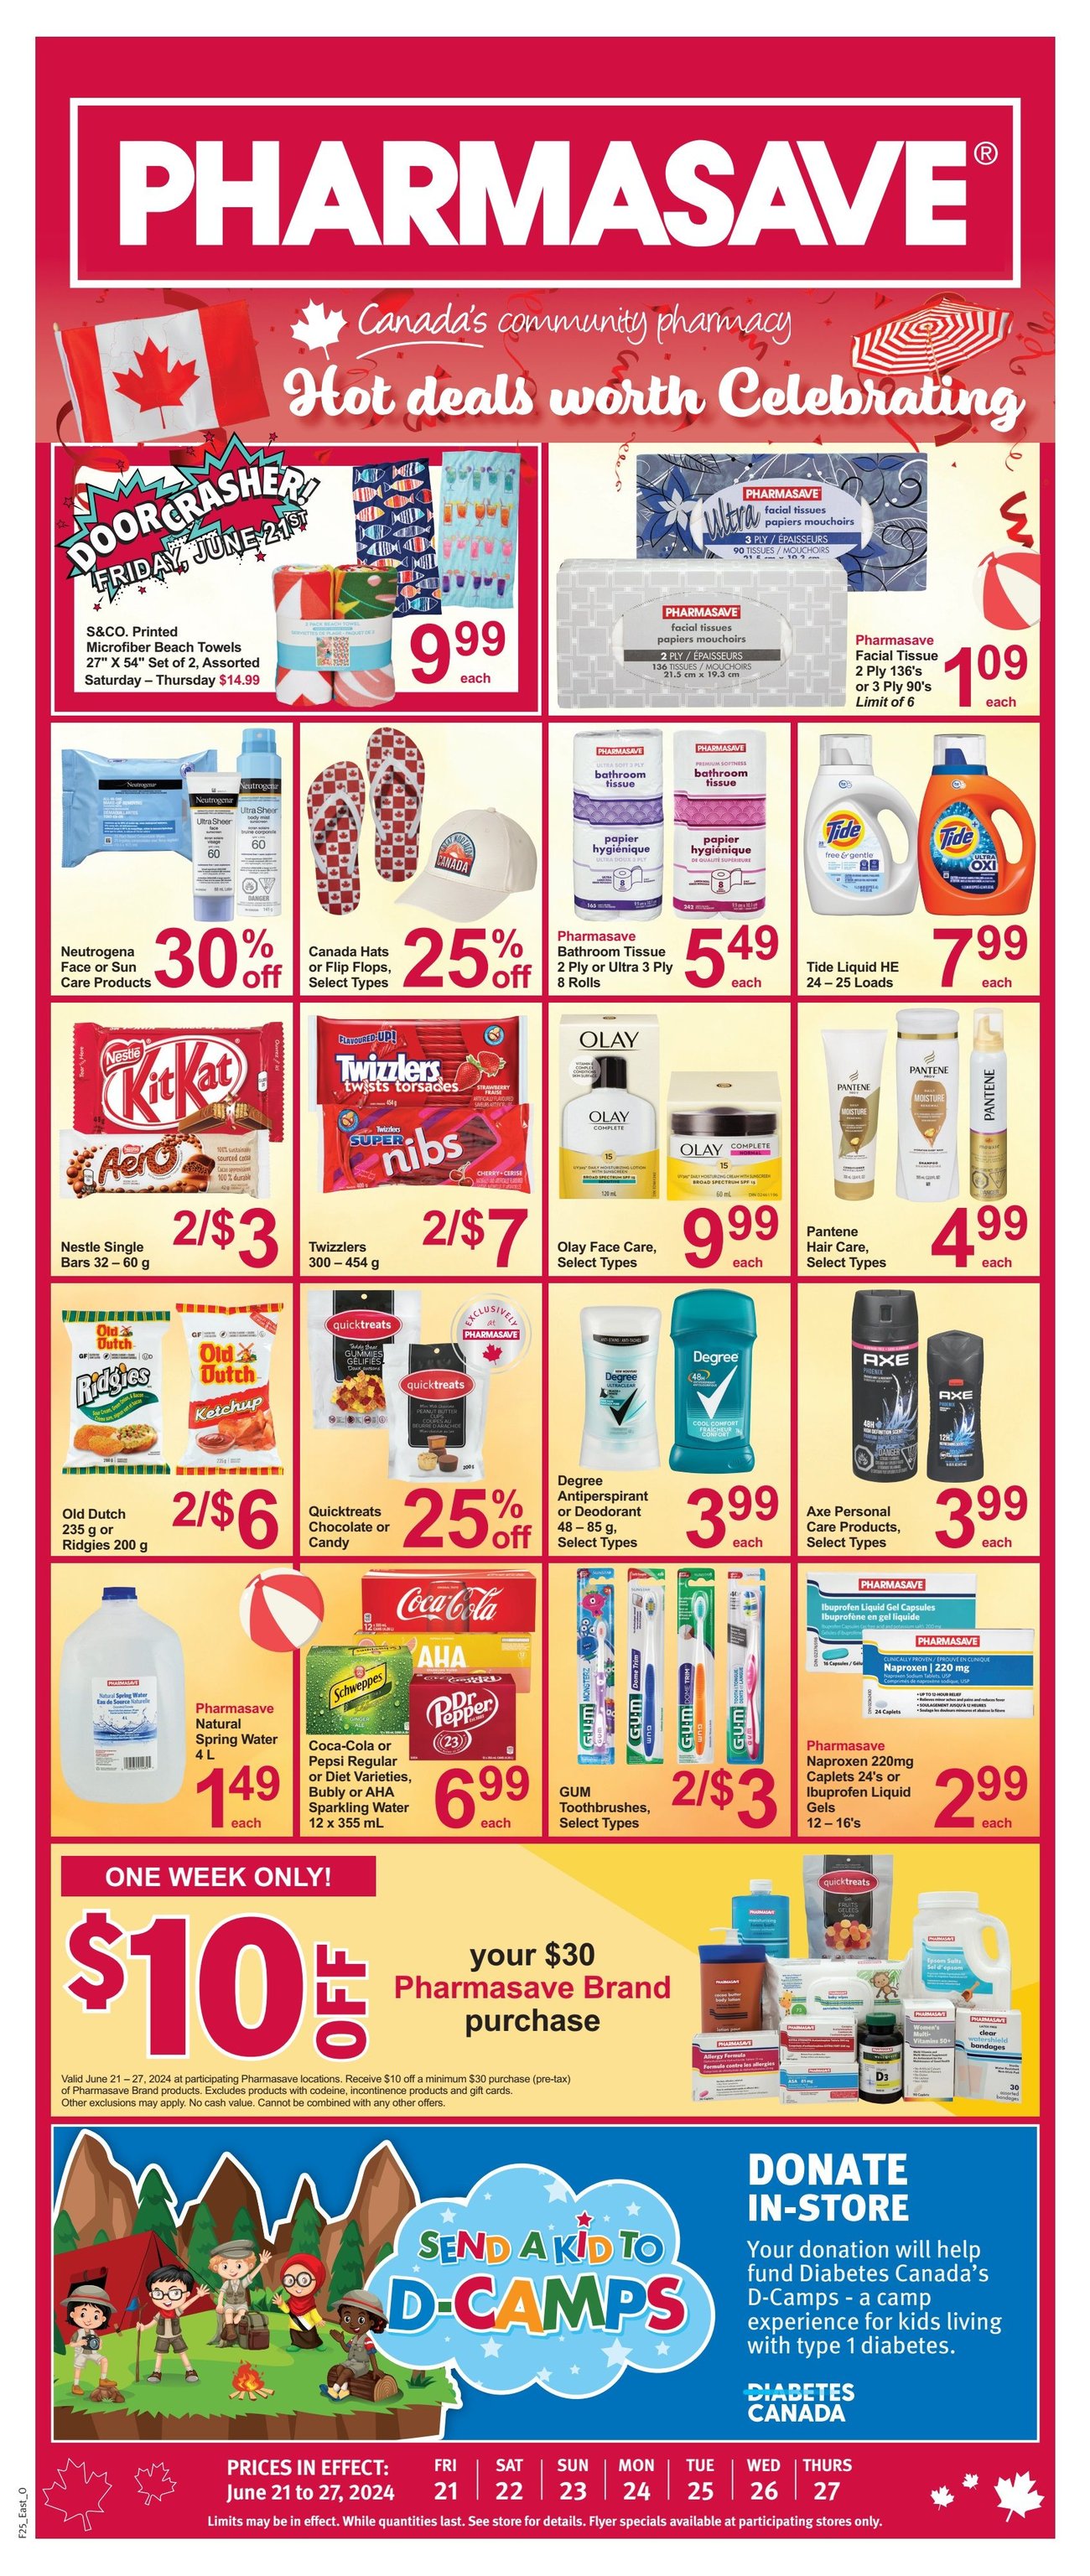 Pharmasave - Ontario - Weekly Flyer Specials - Page 1